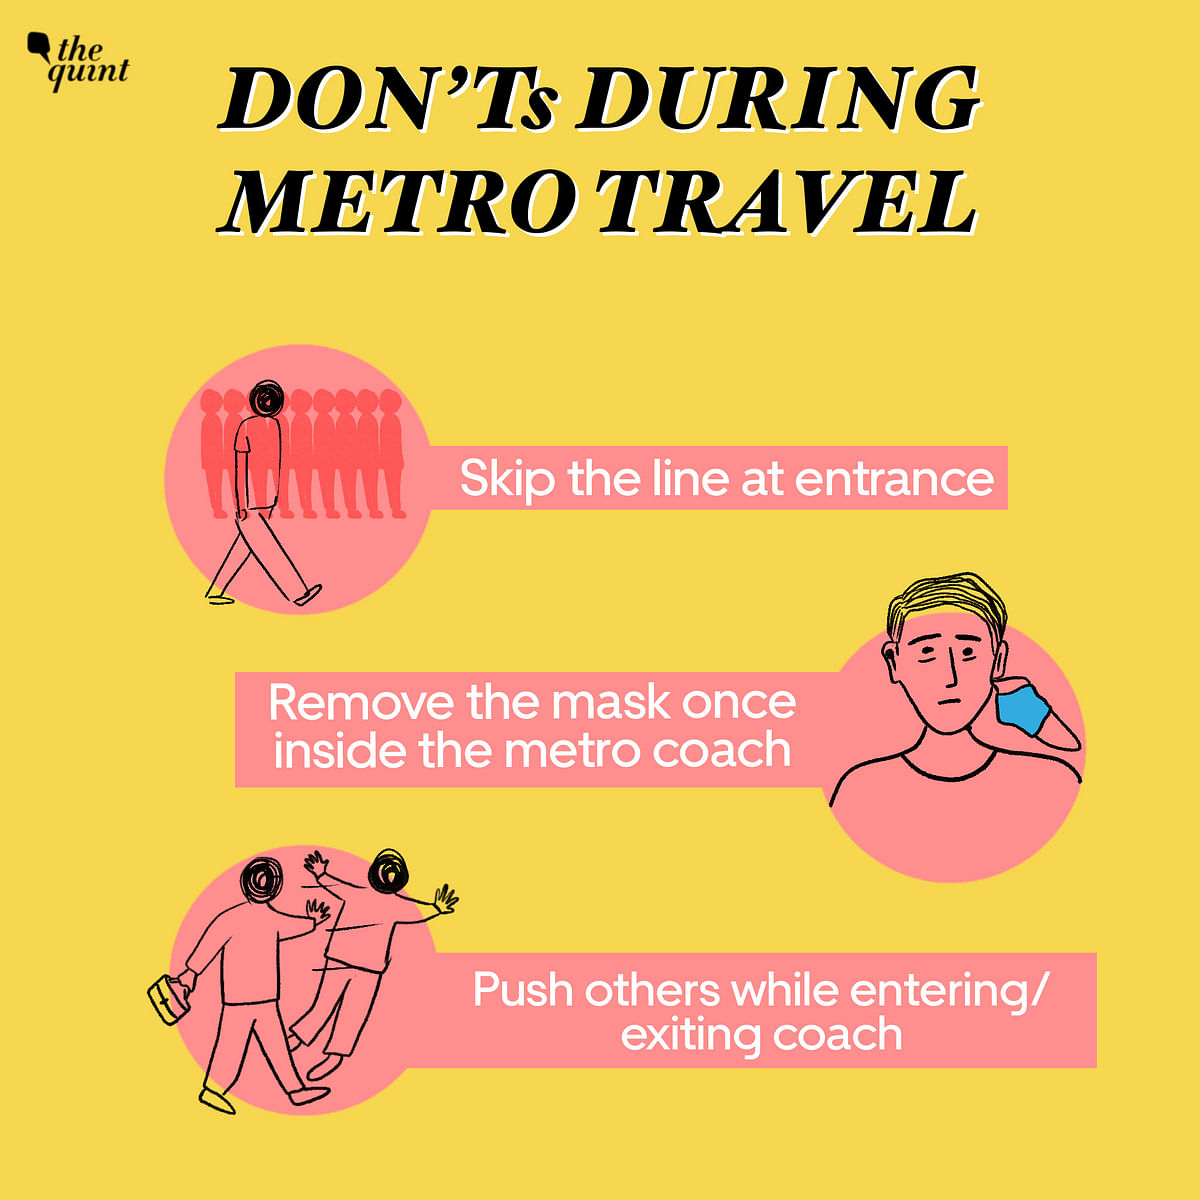 Wear Face Mask, Don’t Skip Lines: Dos & Don’ts During Metro Travel